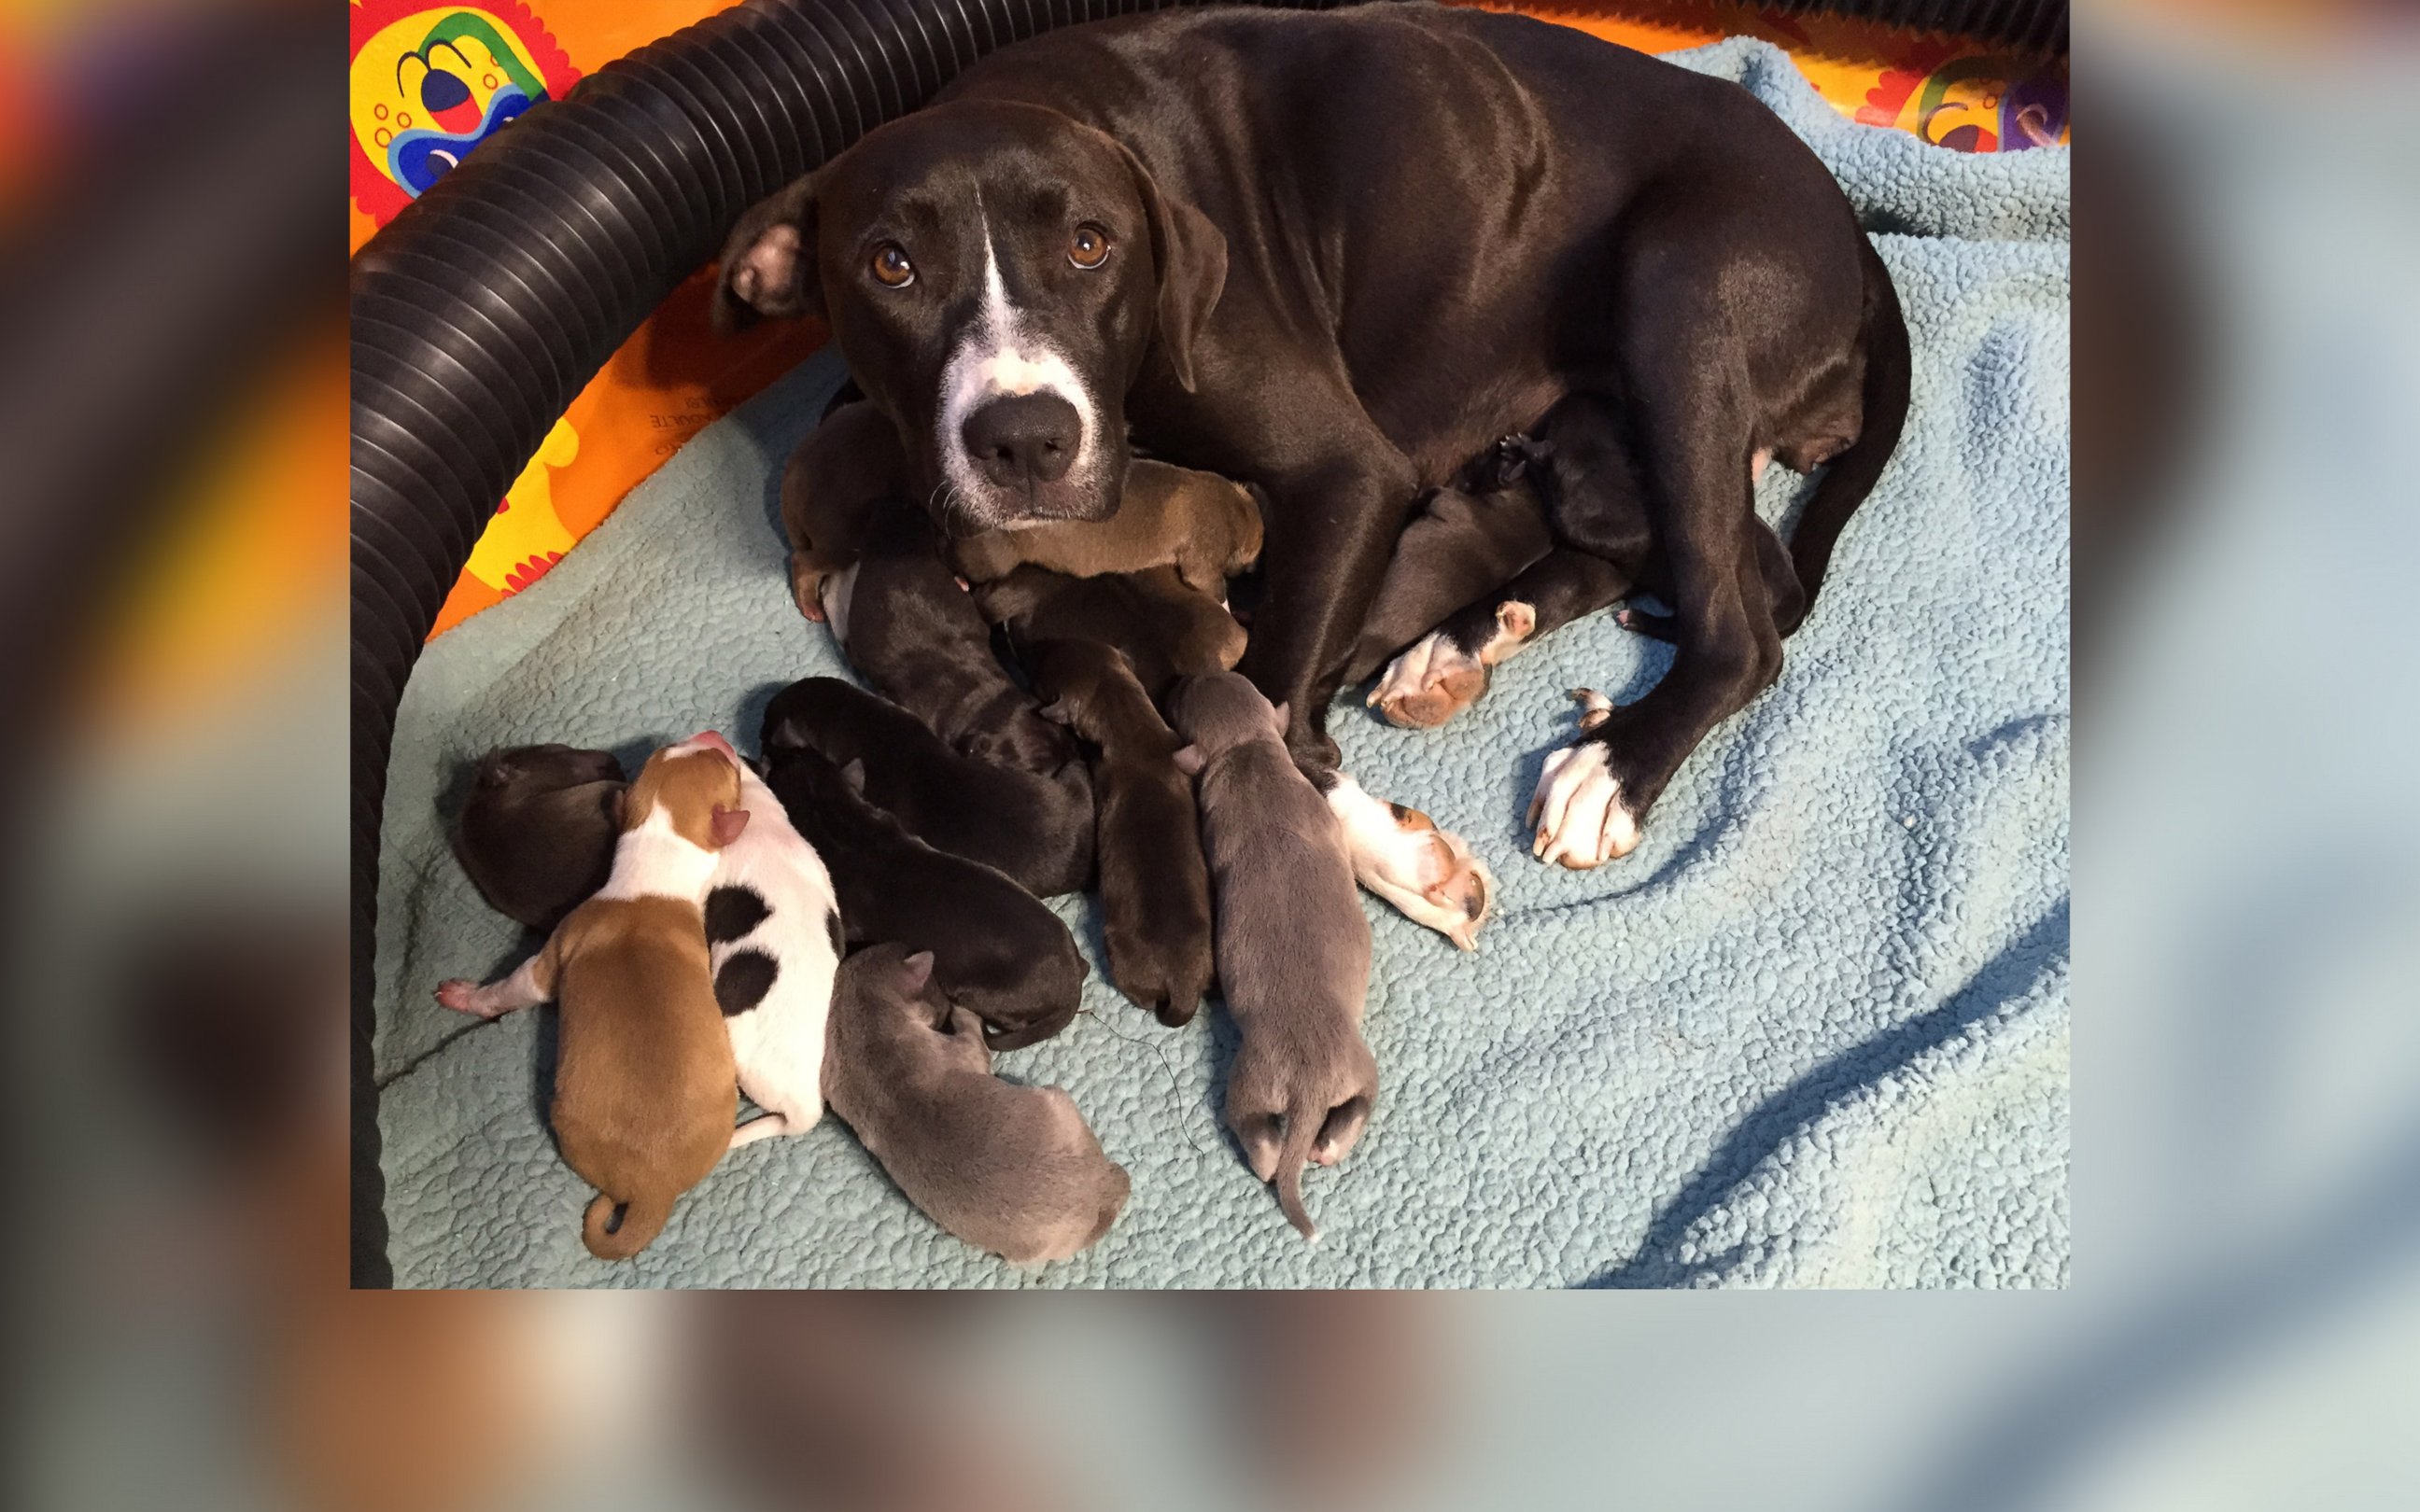 PHOTO: Maggie, an 8-month-old pointer-mix, gave birth to 16 puppies in the home of an employee of the SPCA Suncoast animal shelter in New Port Richey, Florida, on May 8, Mother's Day. 